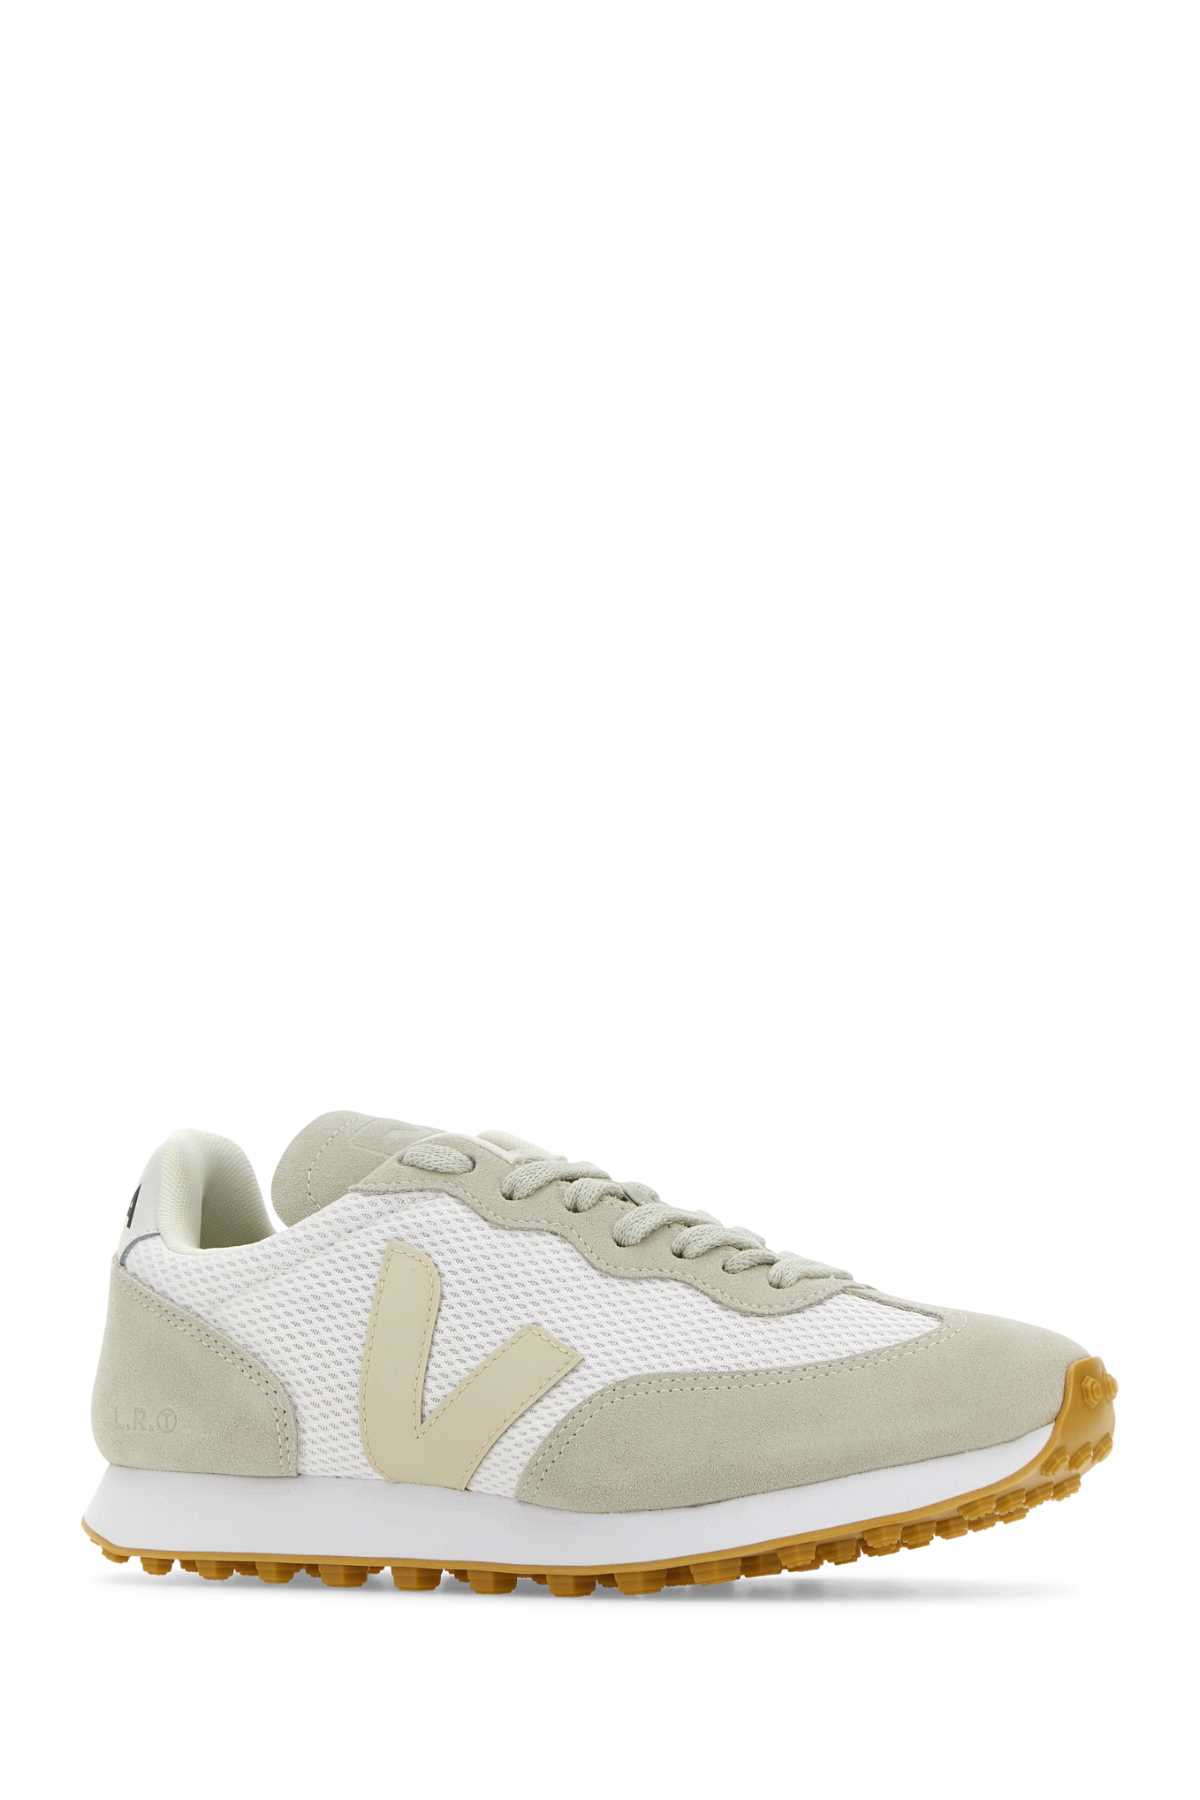 Shop Veja Two-tones Polyester And Suede Rio Branco Sneakers In Whitepierrenatural